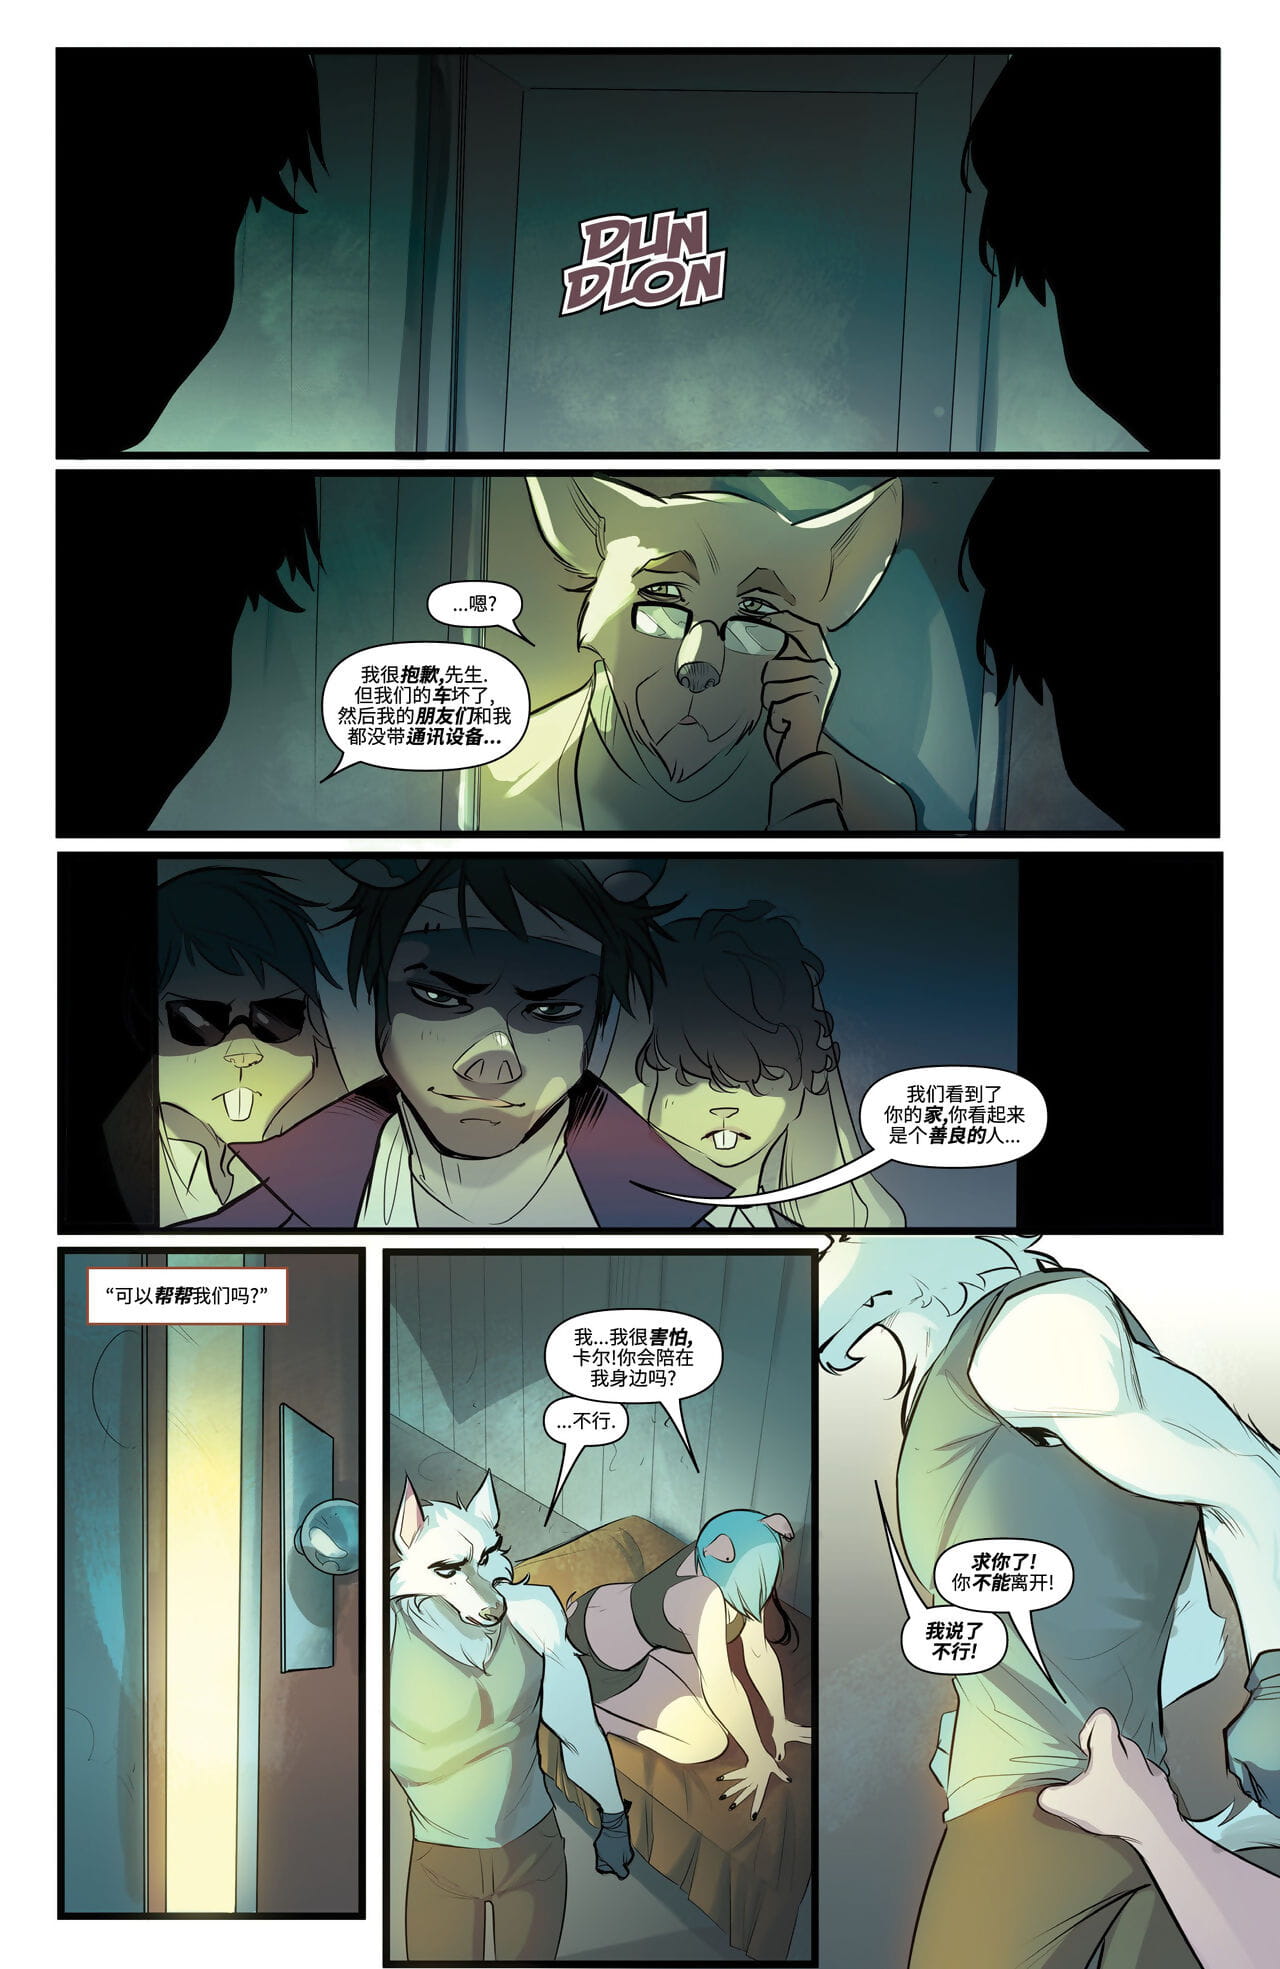 Unnatural - 反自然 - Issue 6 page 1